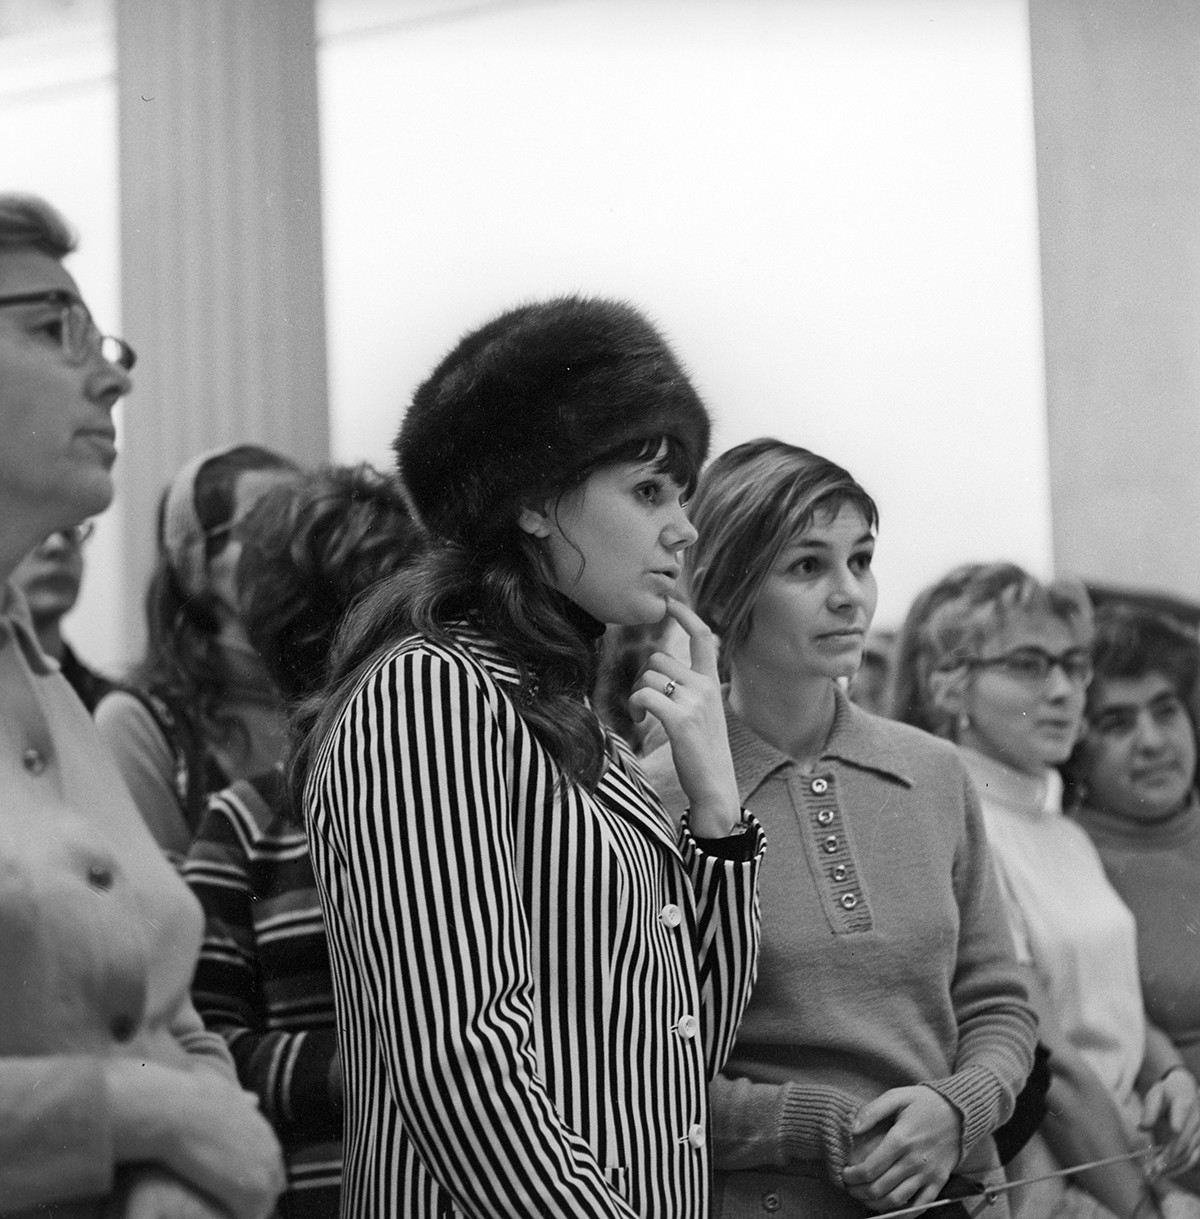 At the Pushkin Museum of Fine Arts in Moscow, 1972.